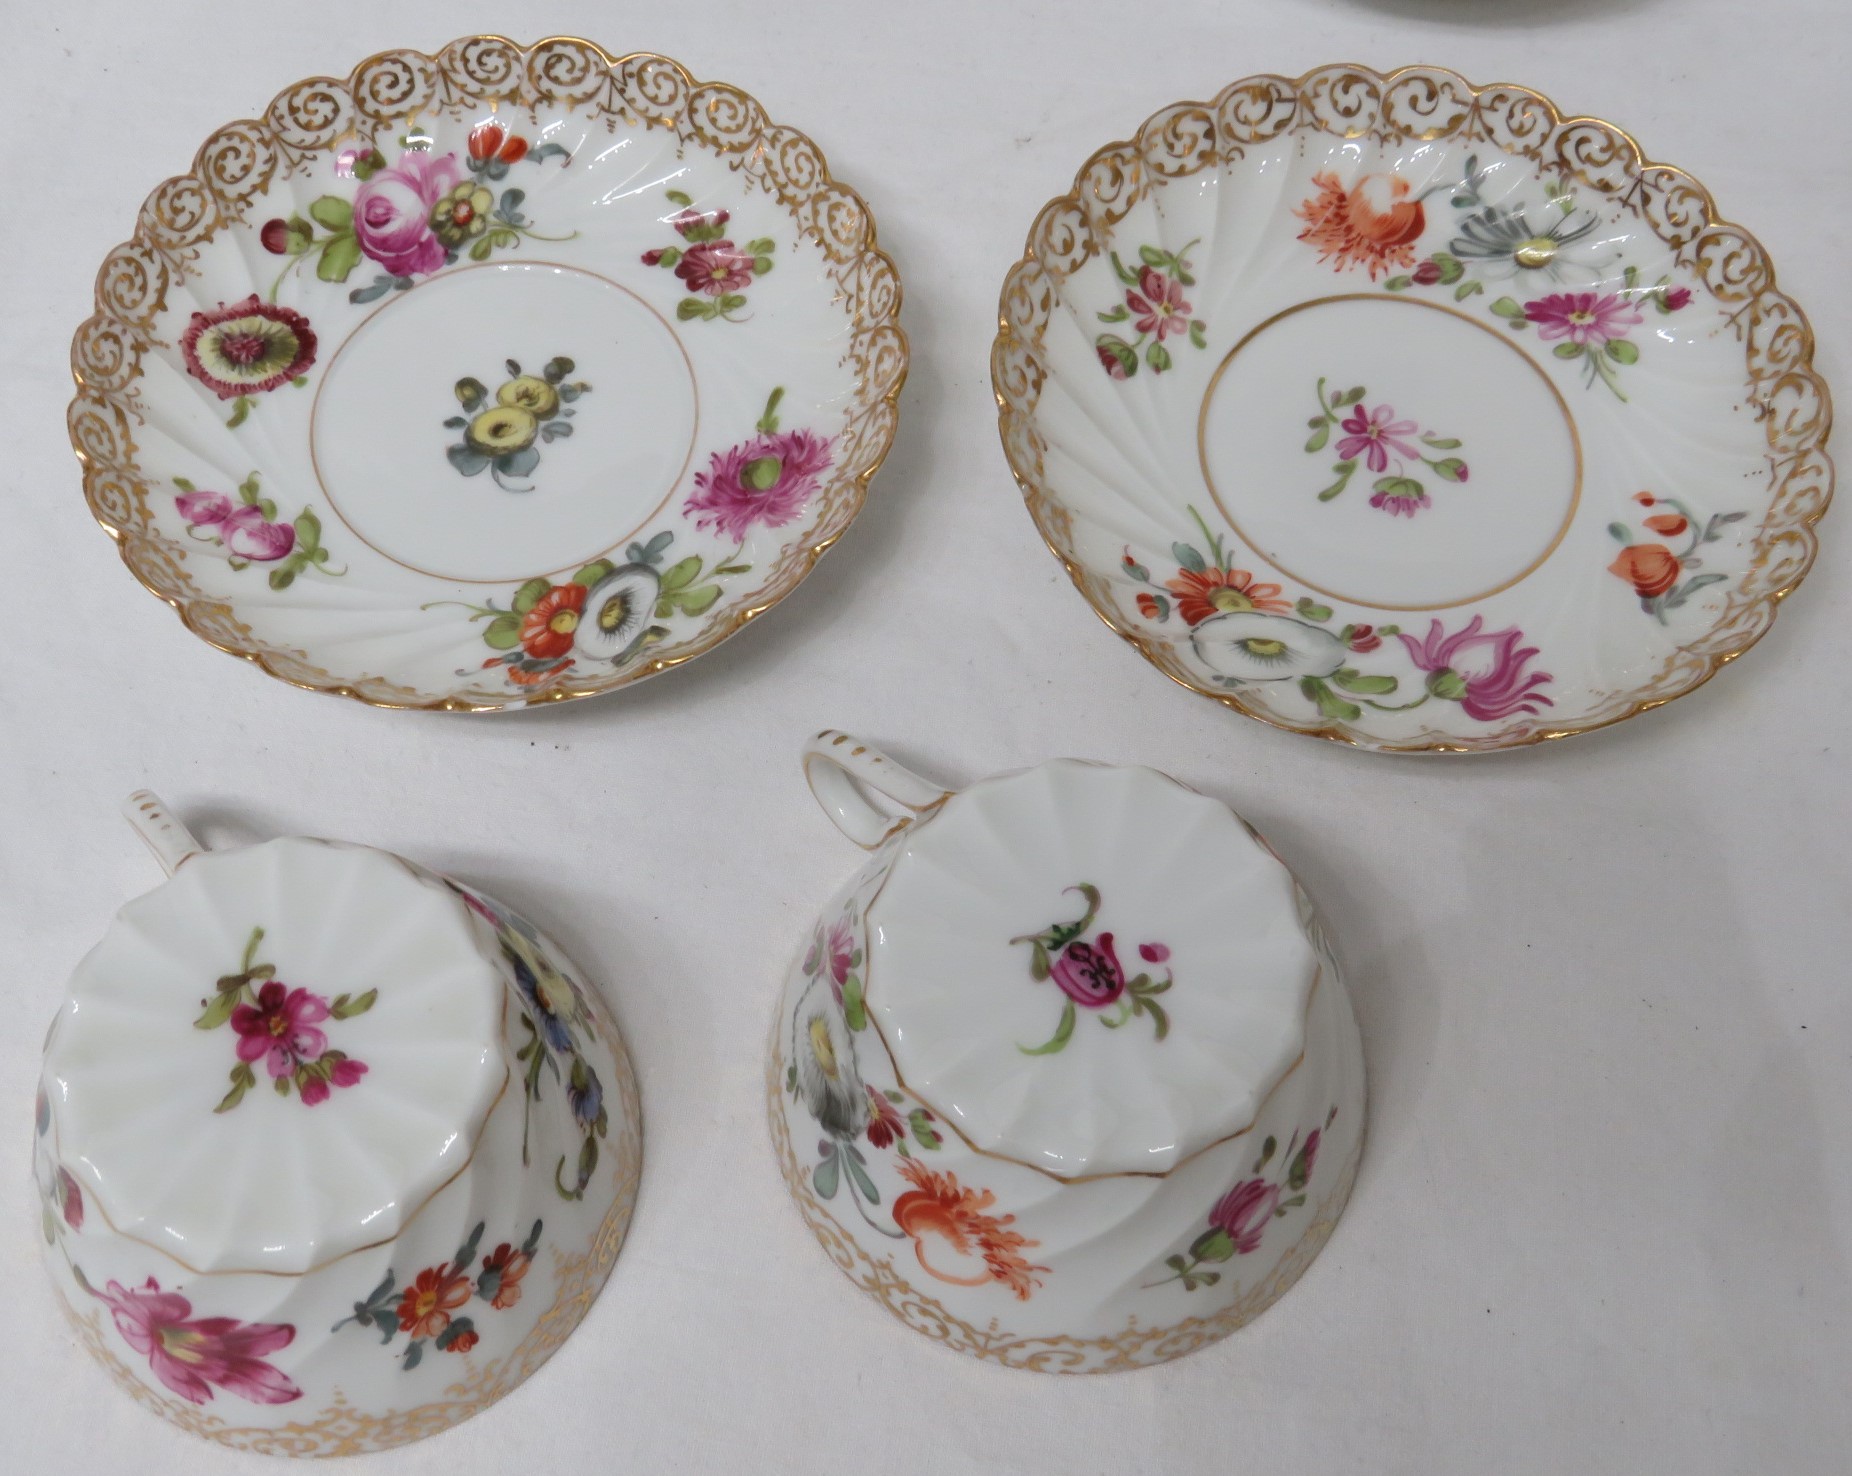 Set of eight very fine Dresden eggshell porcelain cups and saucers hand painted with flowers, the - Image 4 of 5